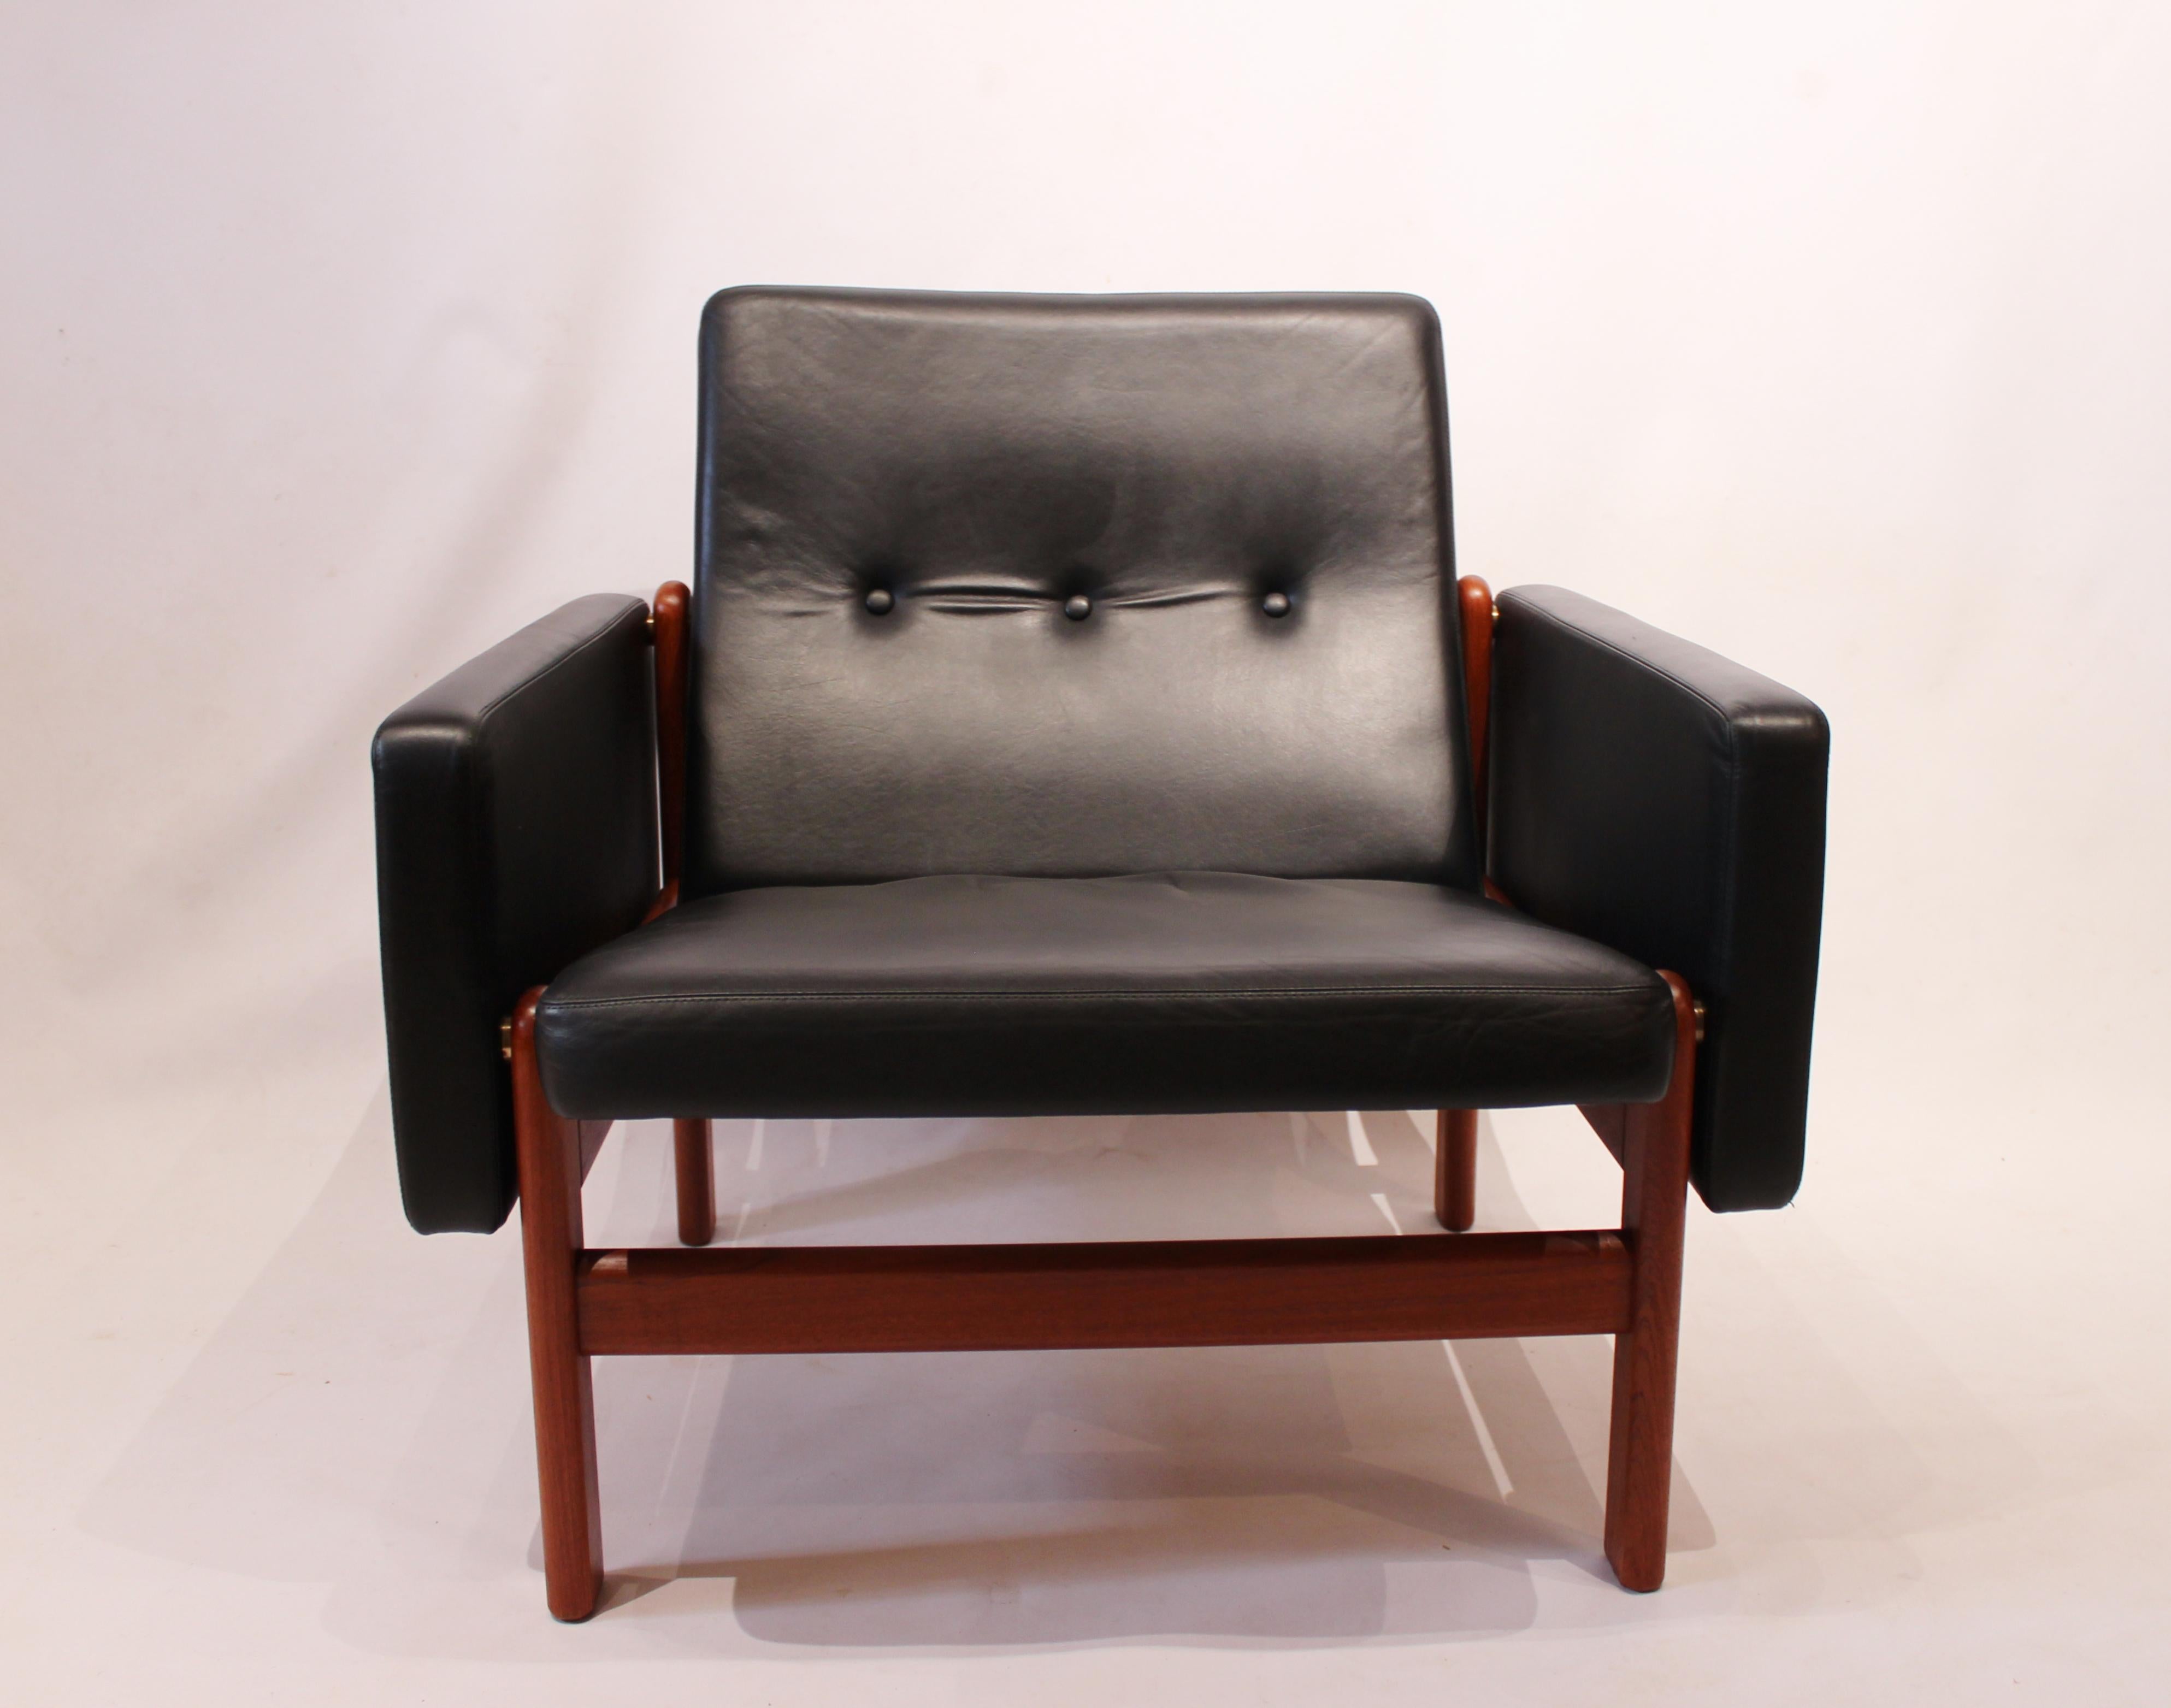 Easy chair, model 65 23, with stool, model 64 23, upholstered with black classic leather and frame of teak. The chair and stool are designed by Jørgen Bækmark and manufactured by FDB in the 1960s and are in great vintage condition.
Measurements of